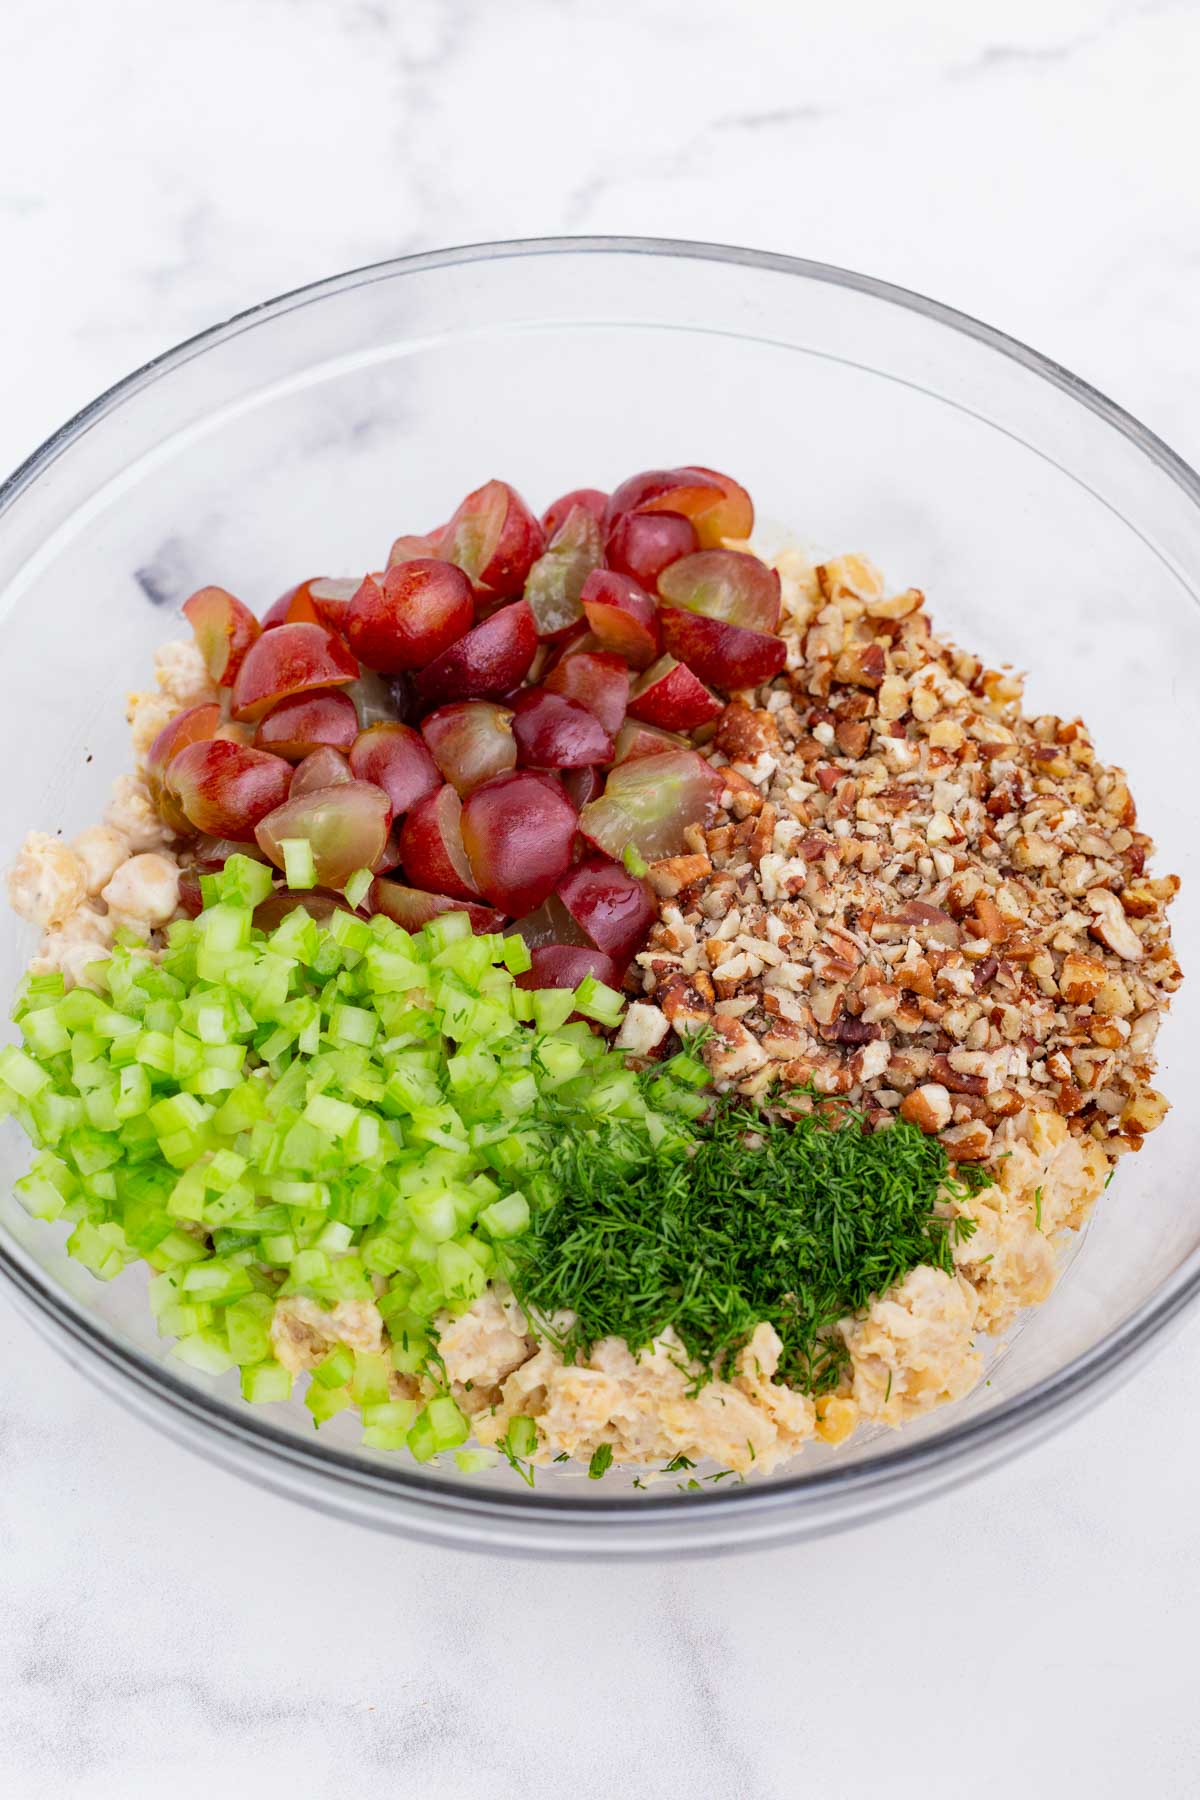 Pecans, grapes, celery, and dill is added to the chickpea salad.